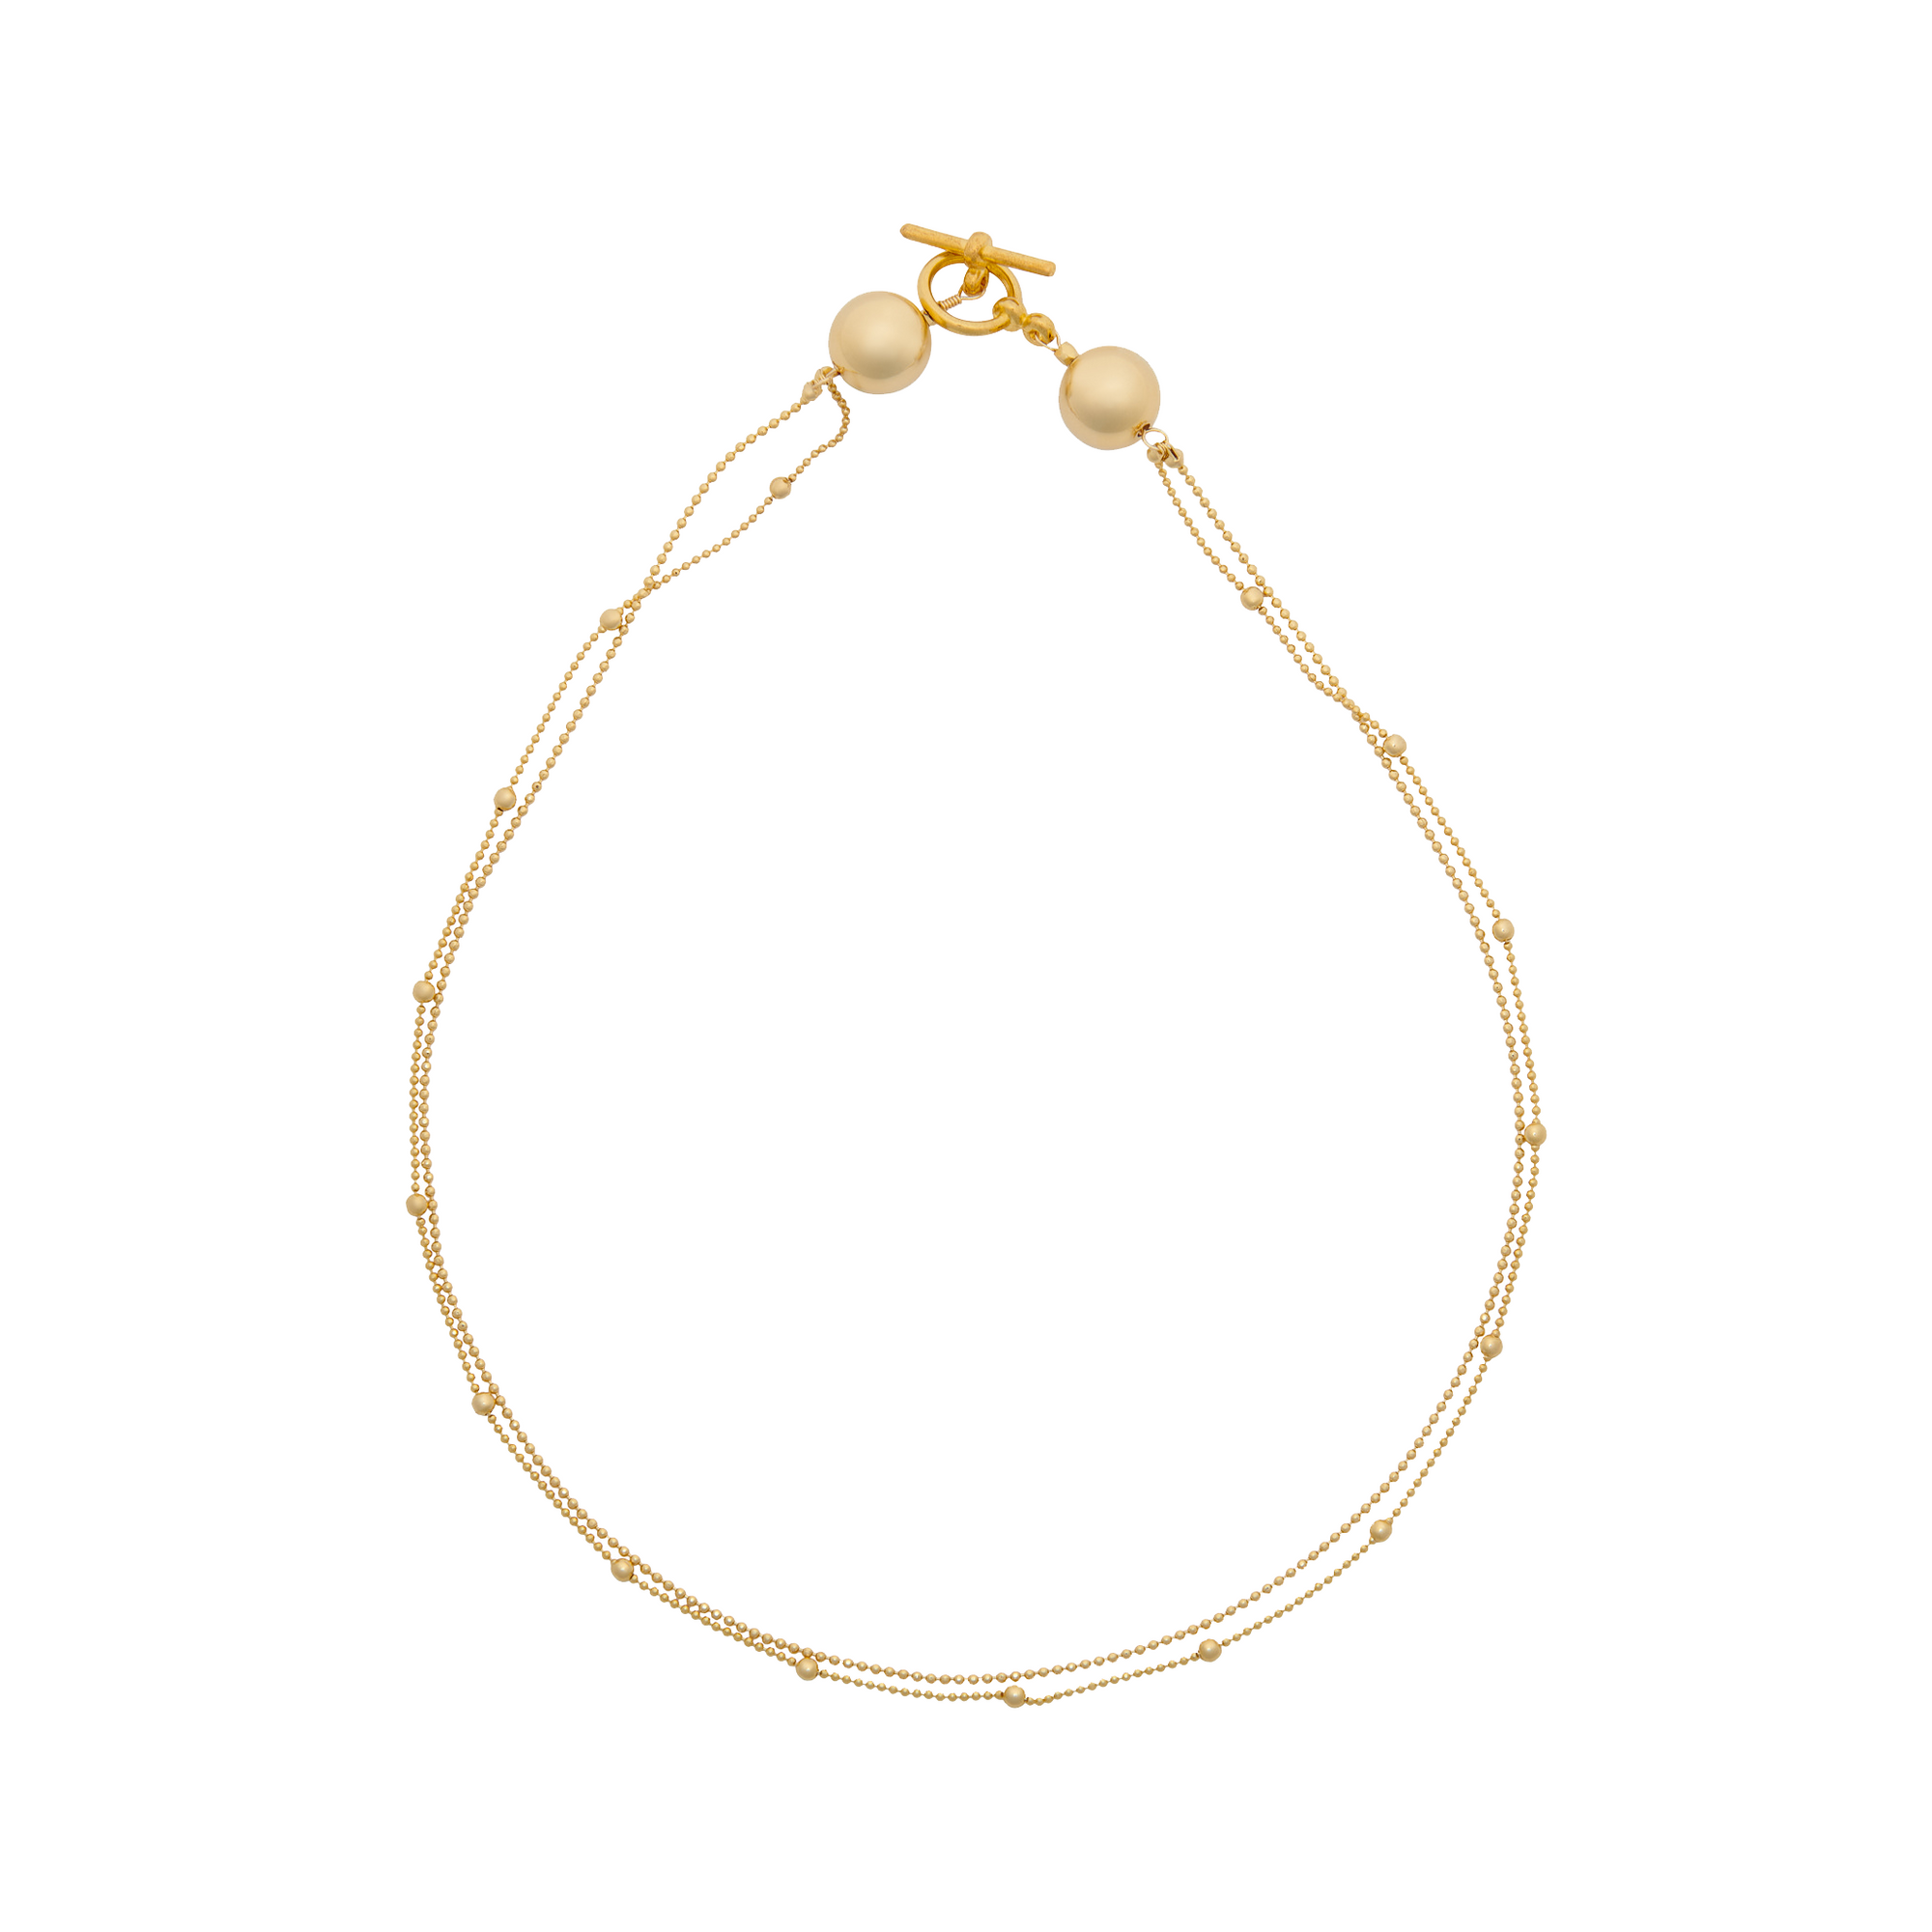 Gold plated ball chain double necklace by vivien walsh